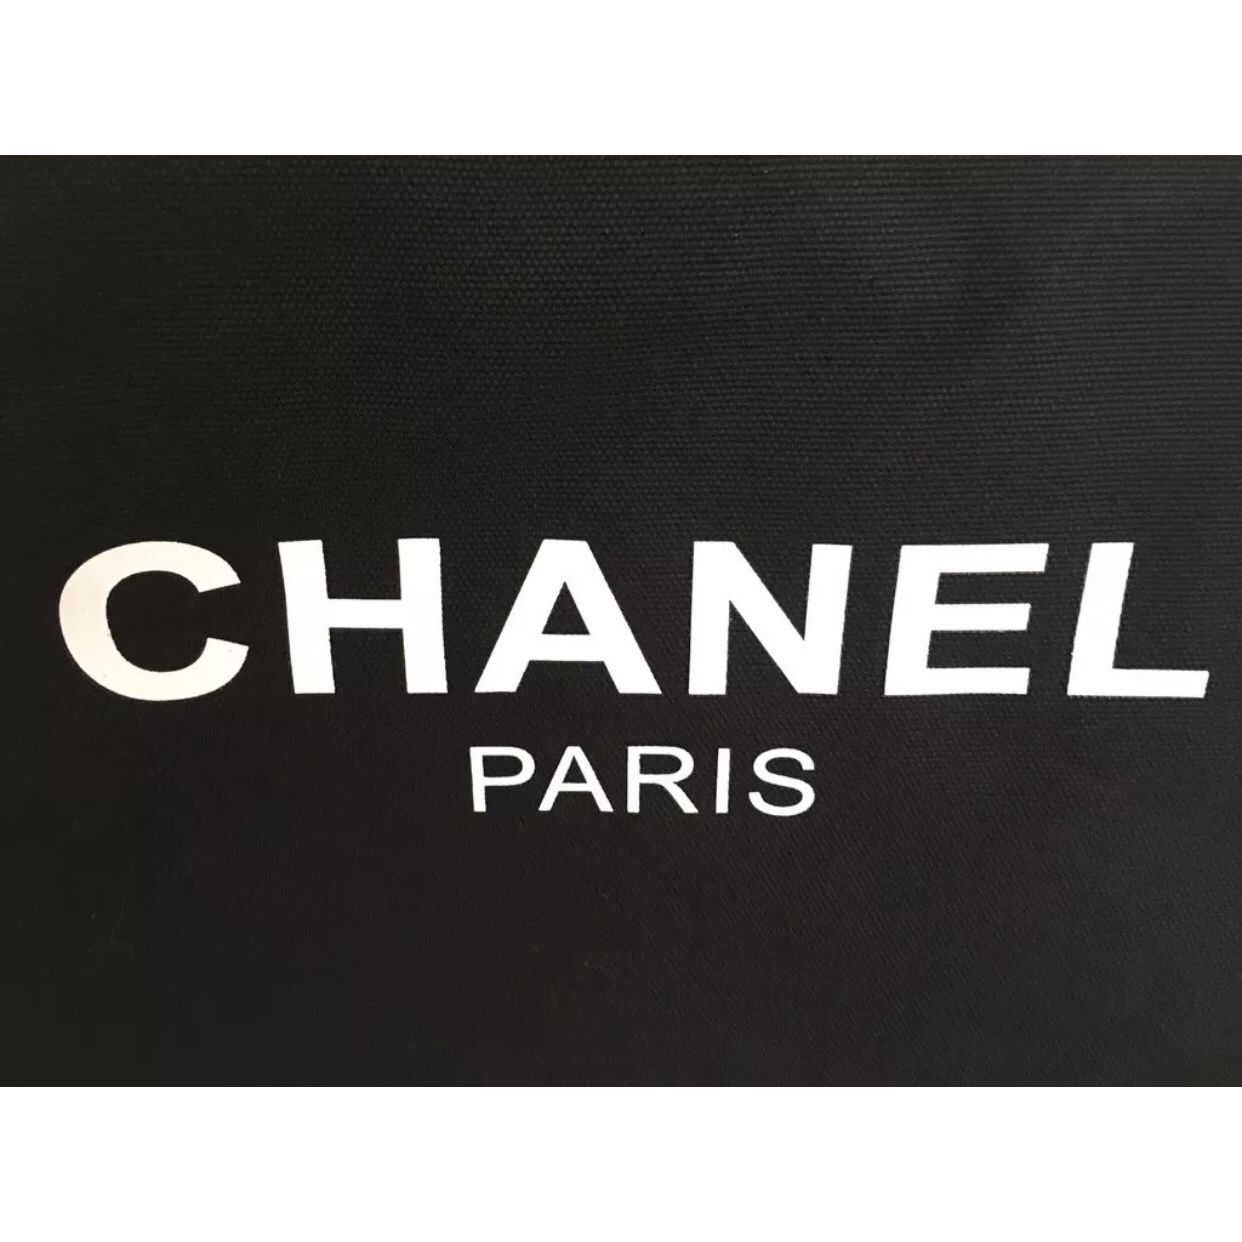 Chanel Gift with purchase VIP Bag for Sale in Santee, CA - OfferUp